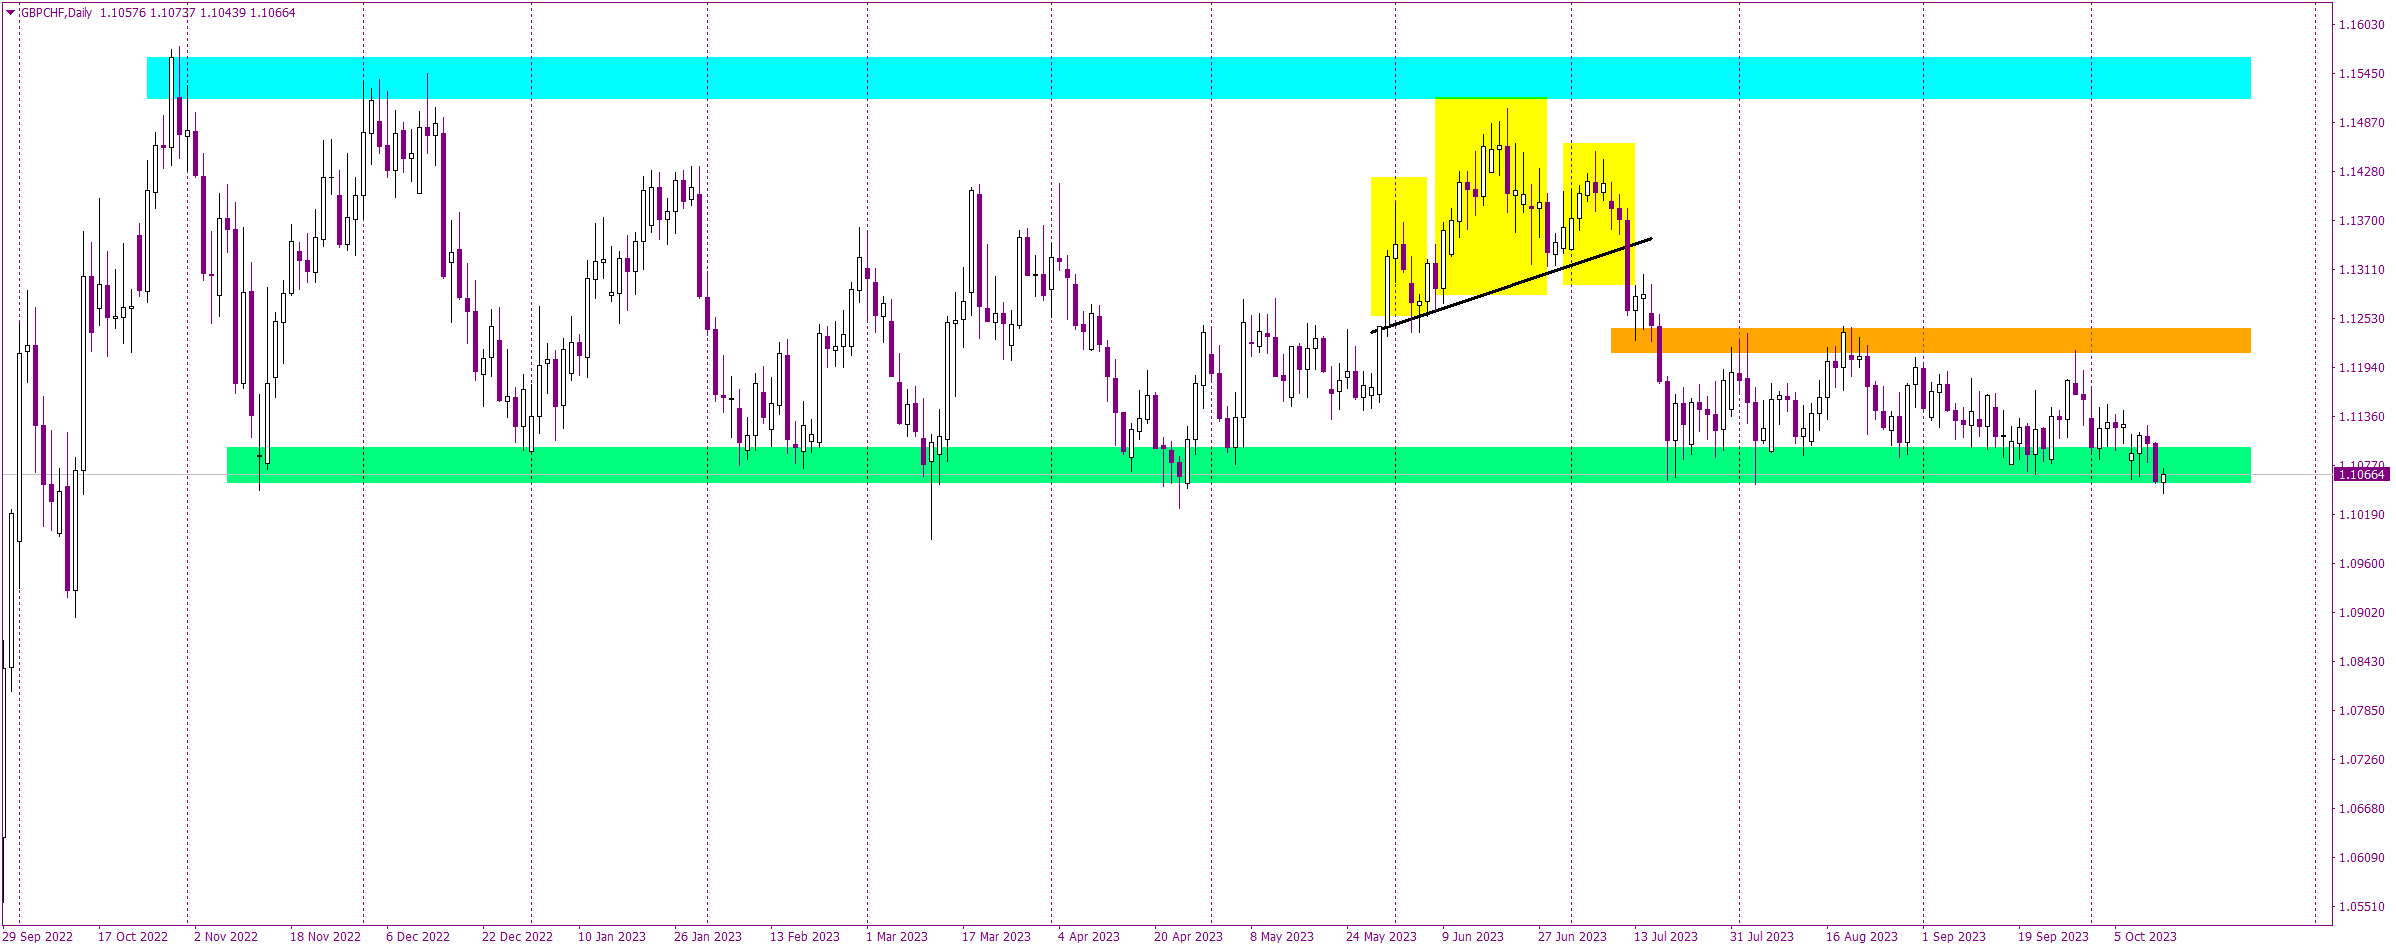 GBPCHF Eyes an Exit from Protracted Lateral Drift